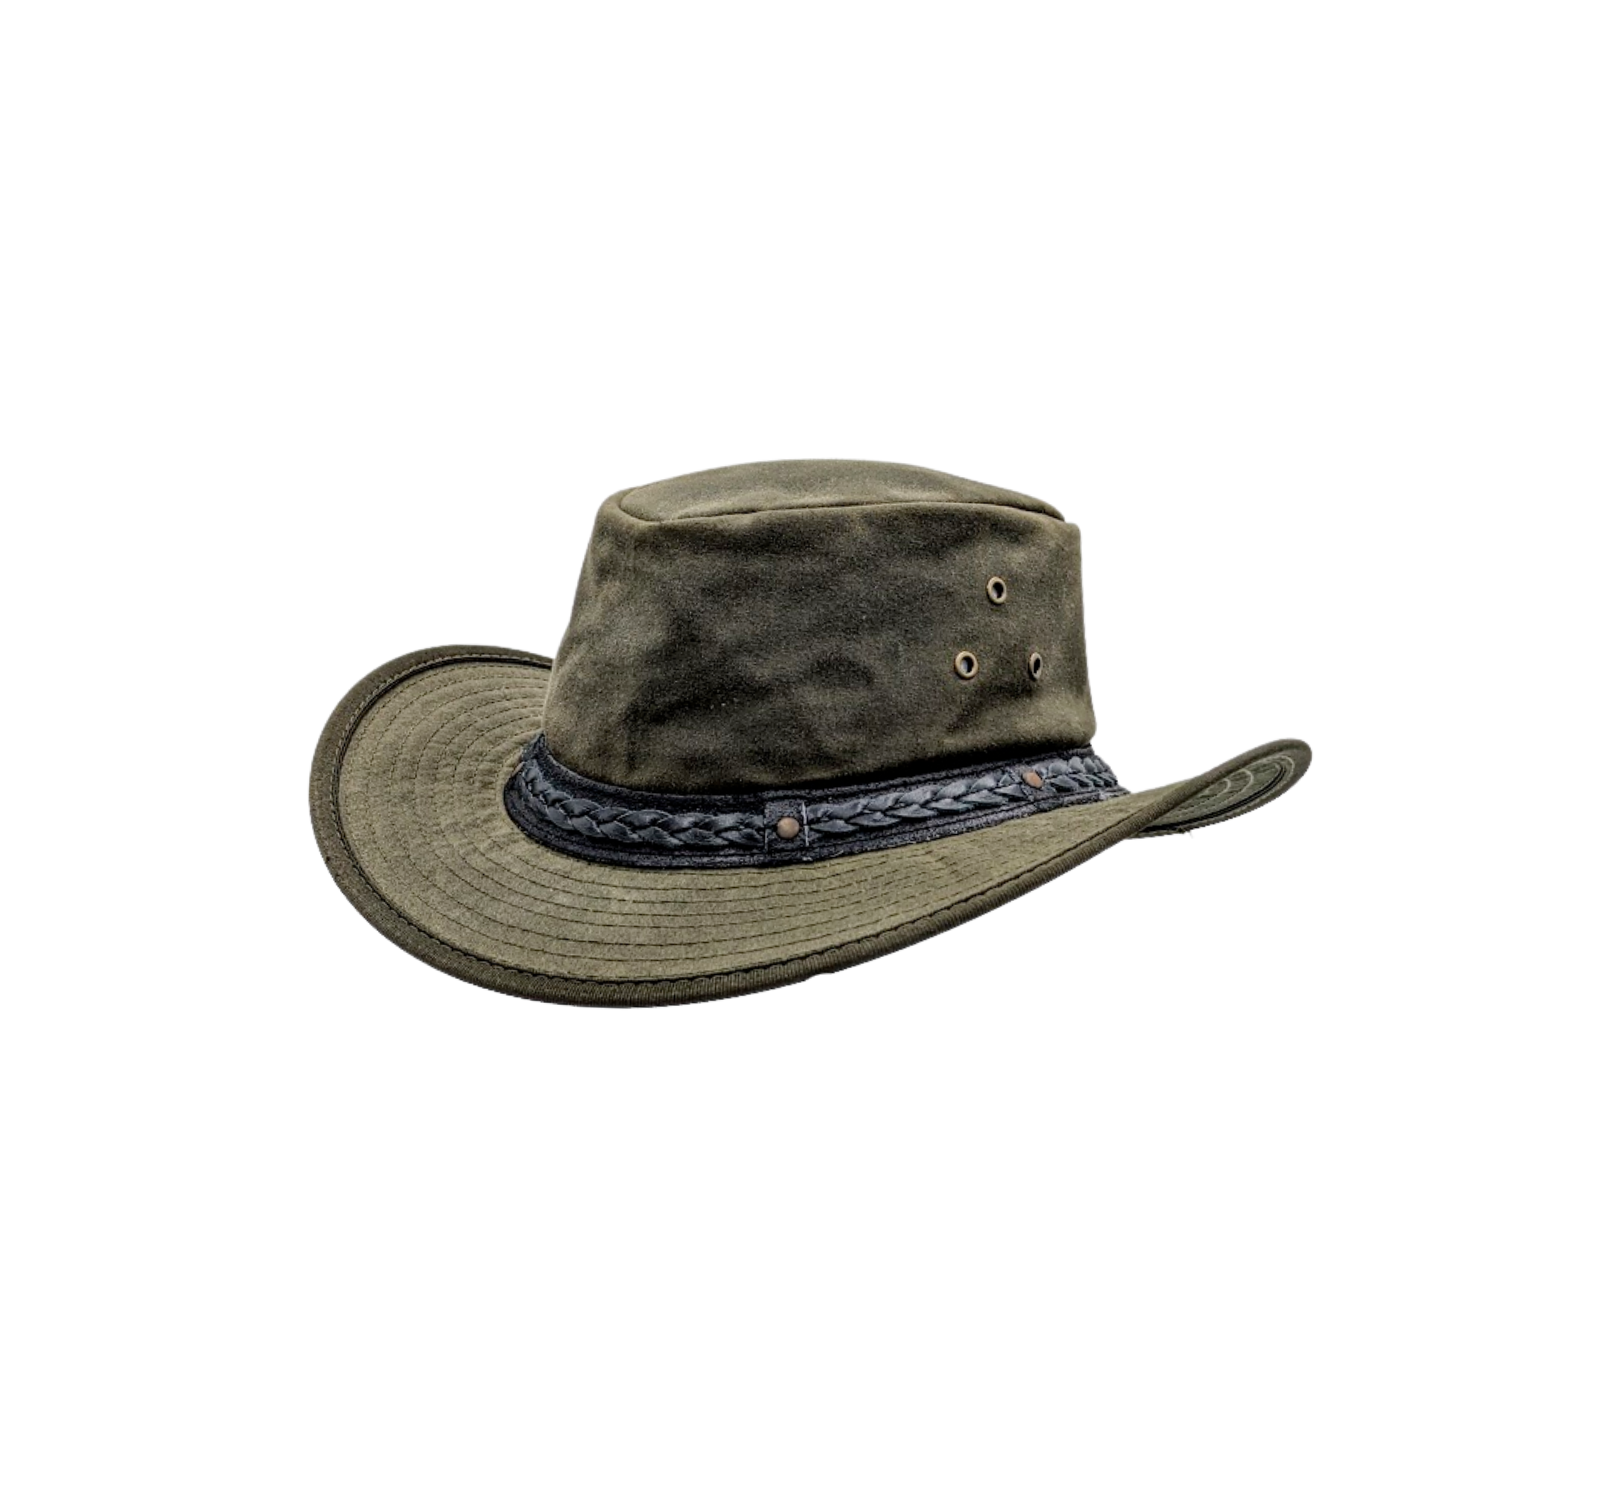 Australian Style Hat with Leather Band